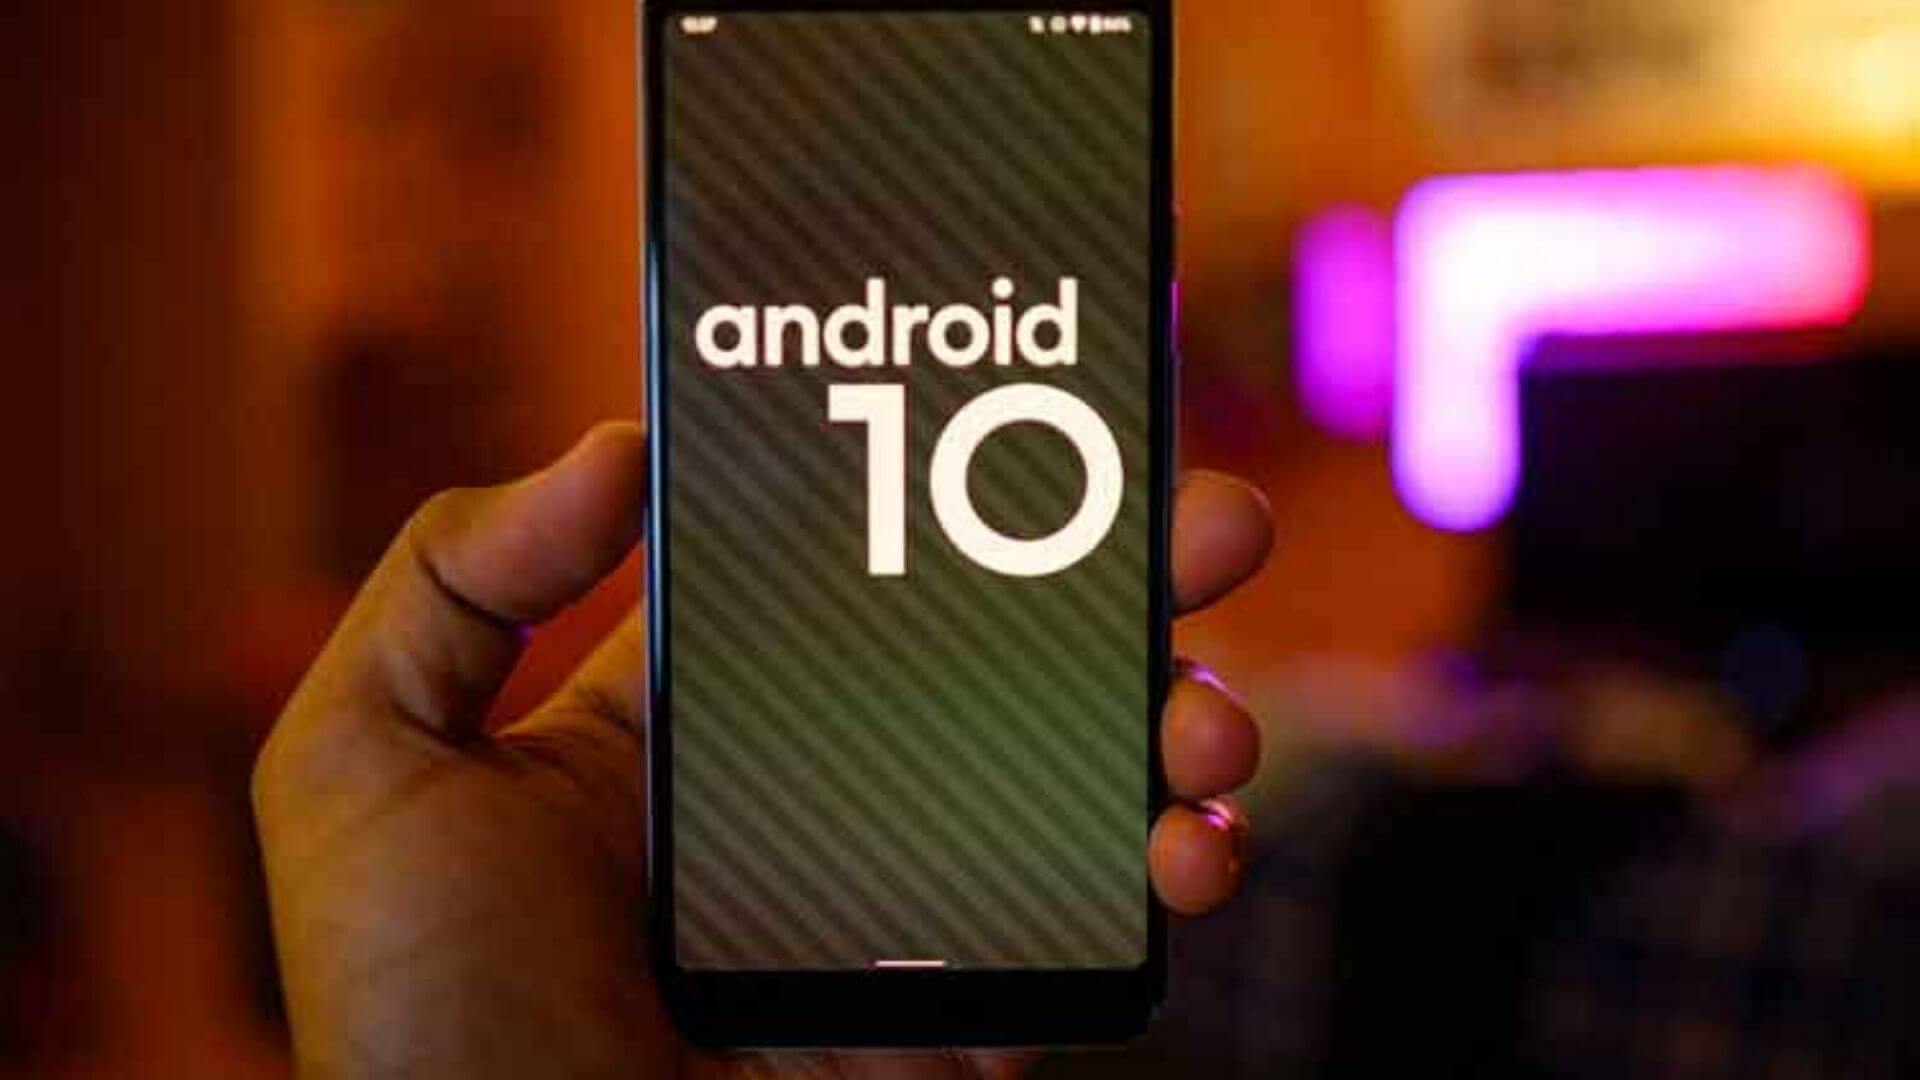 Android 10 Operating System